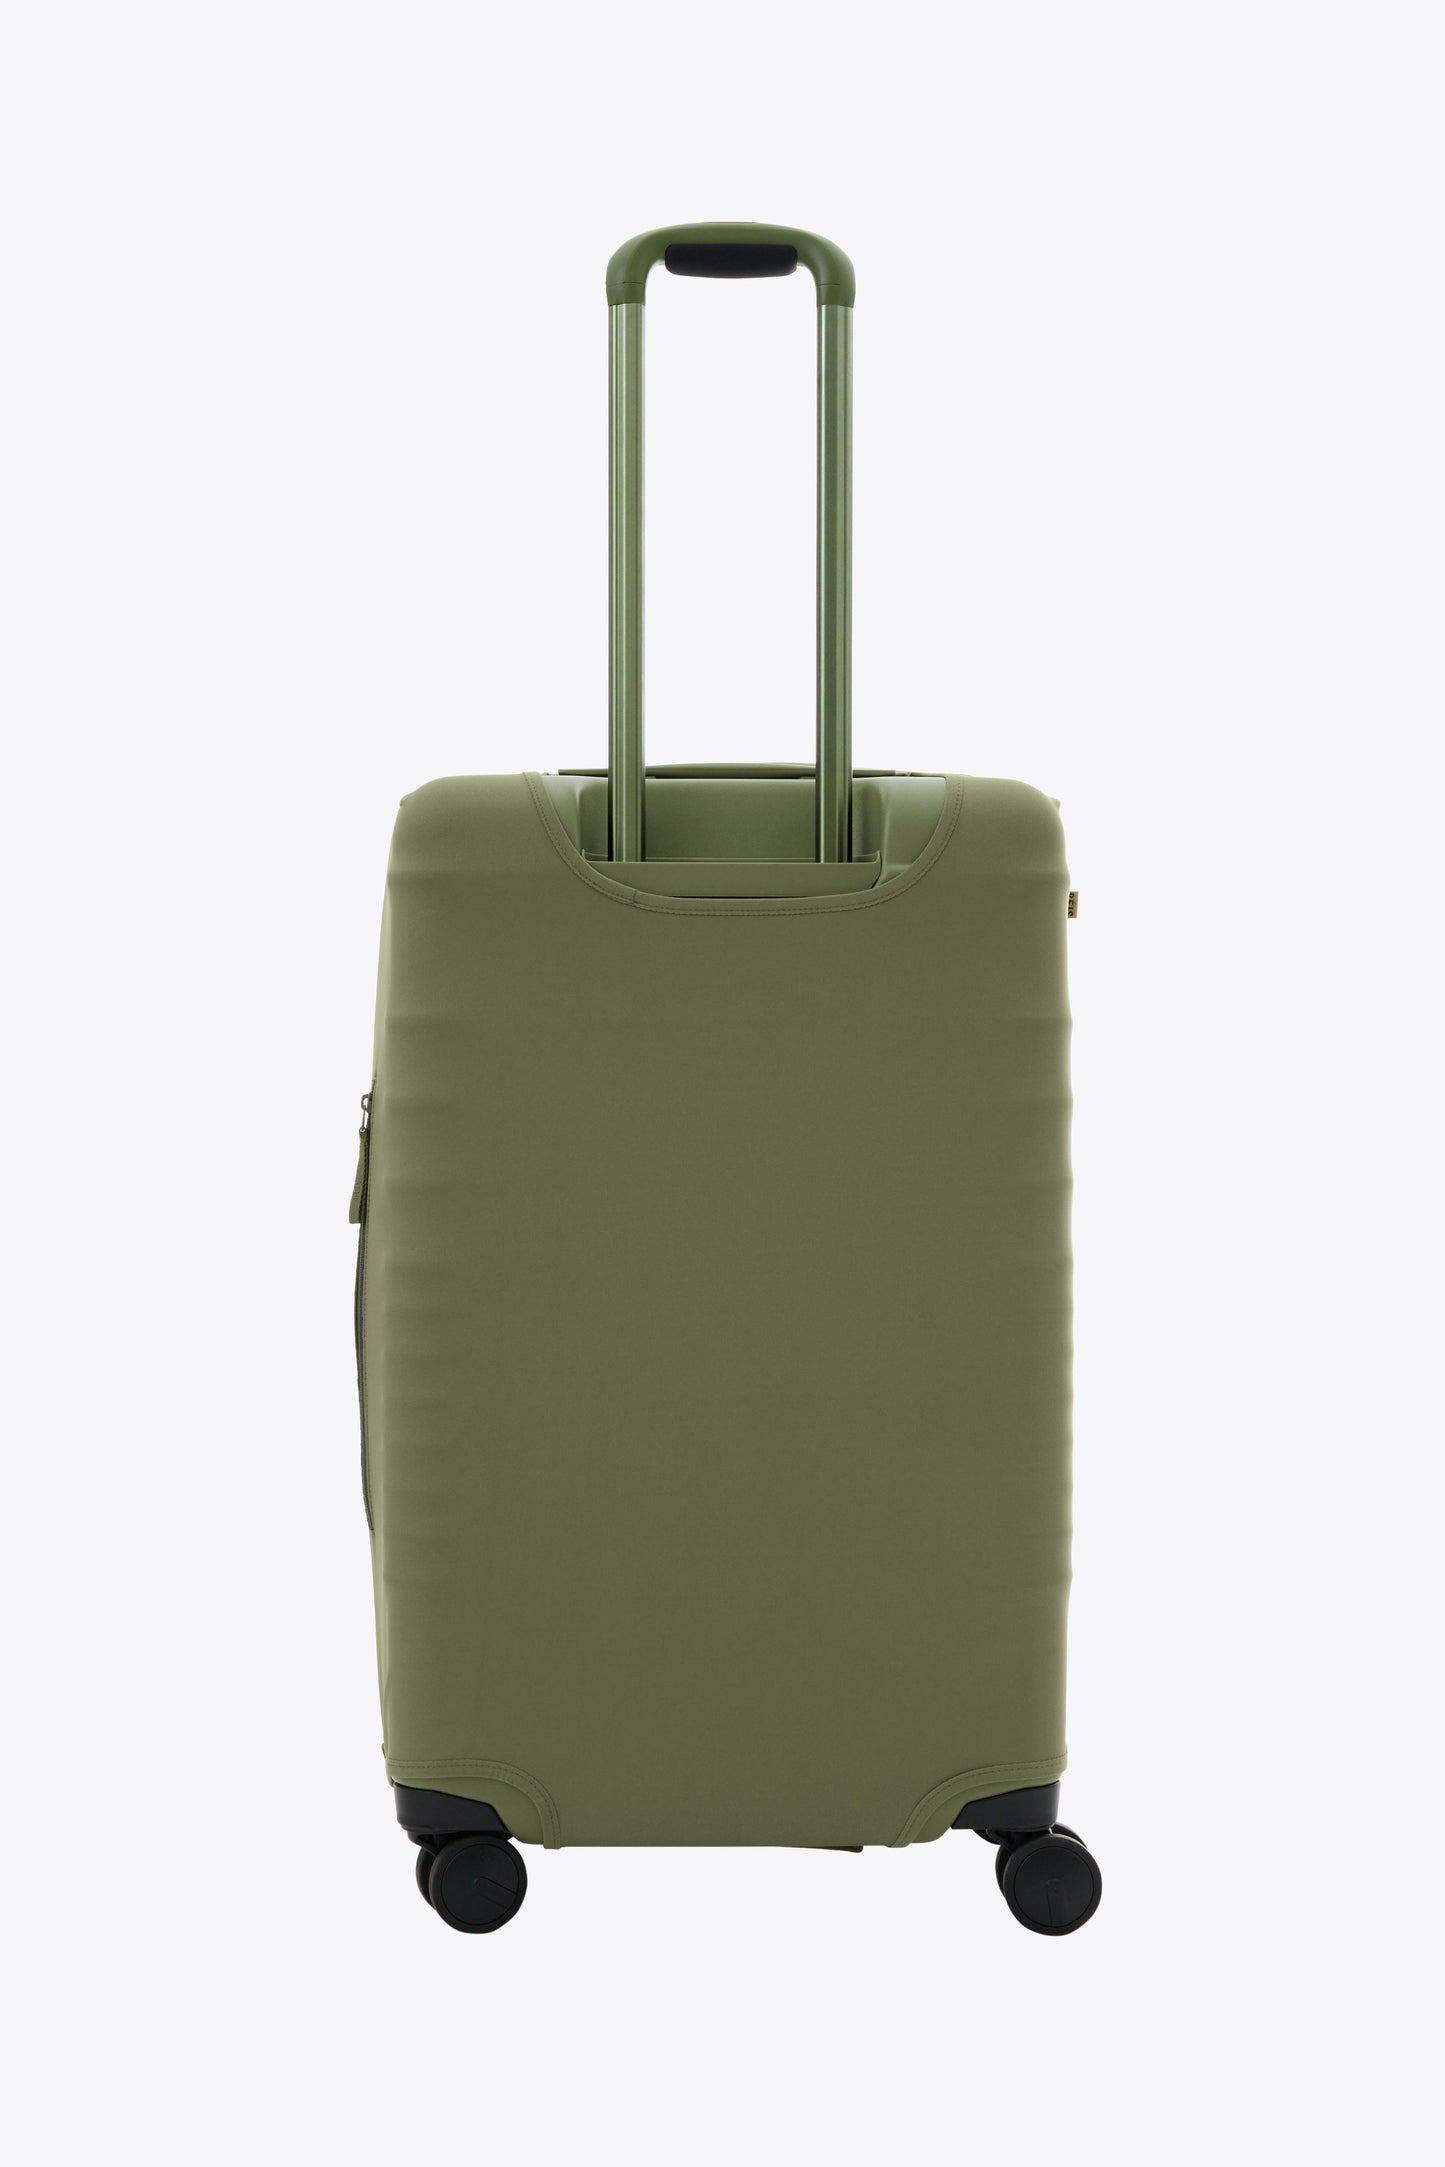 The Medium Check-In Luggage Cover in Olive